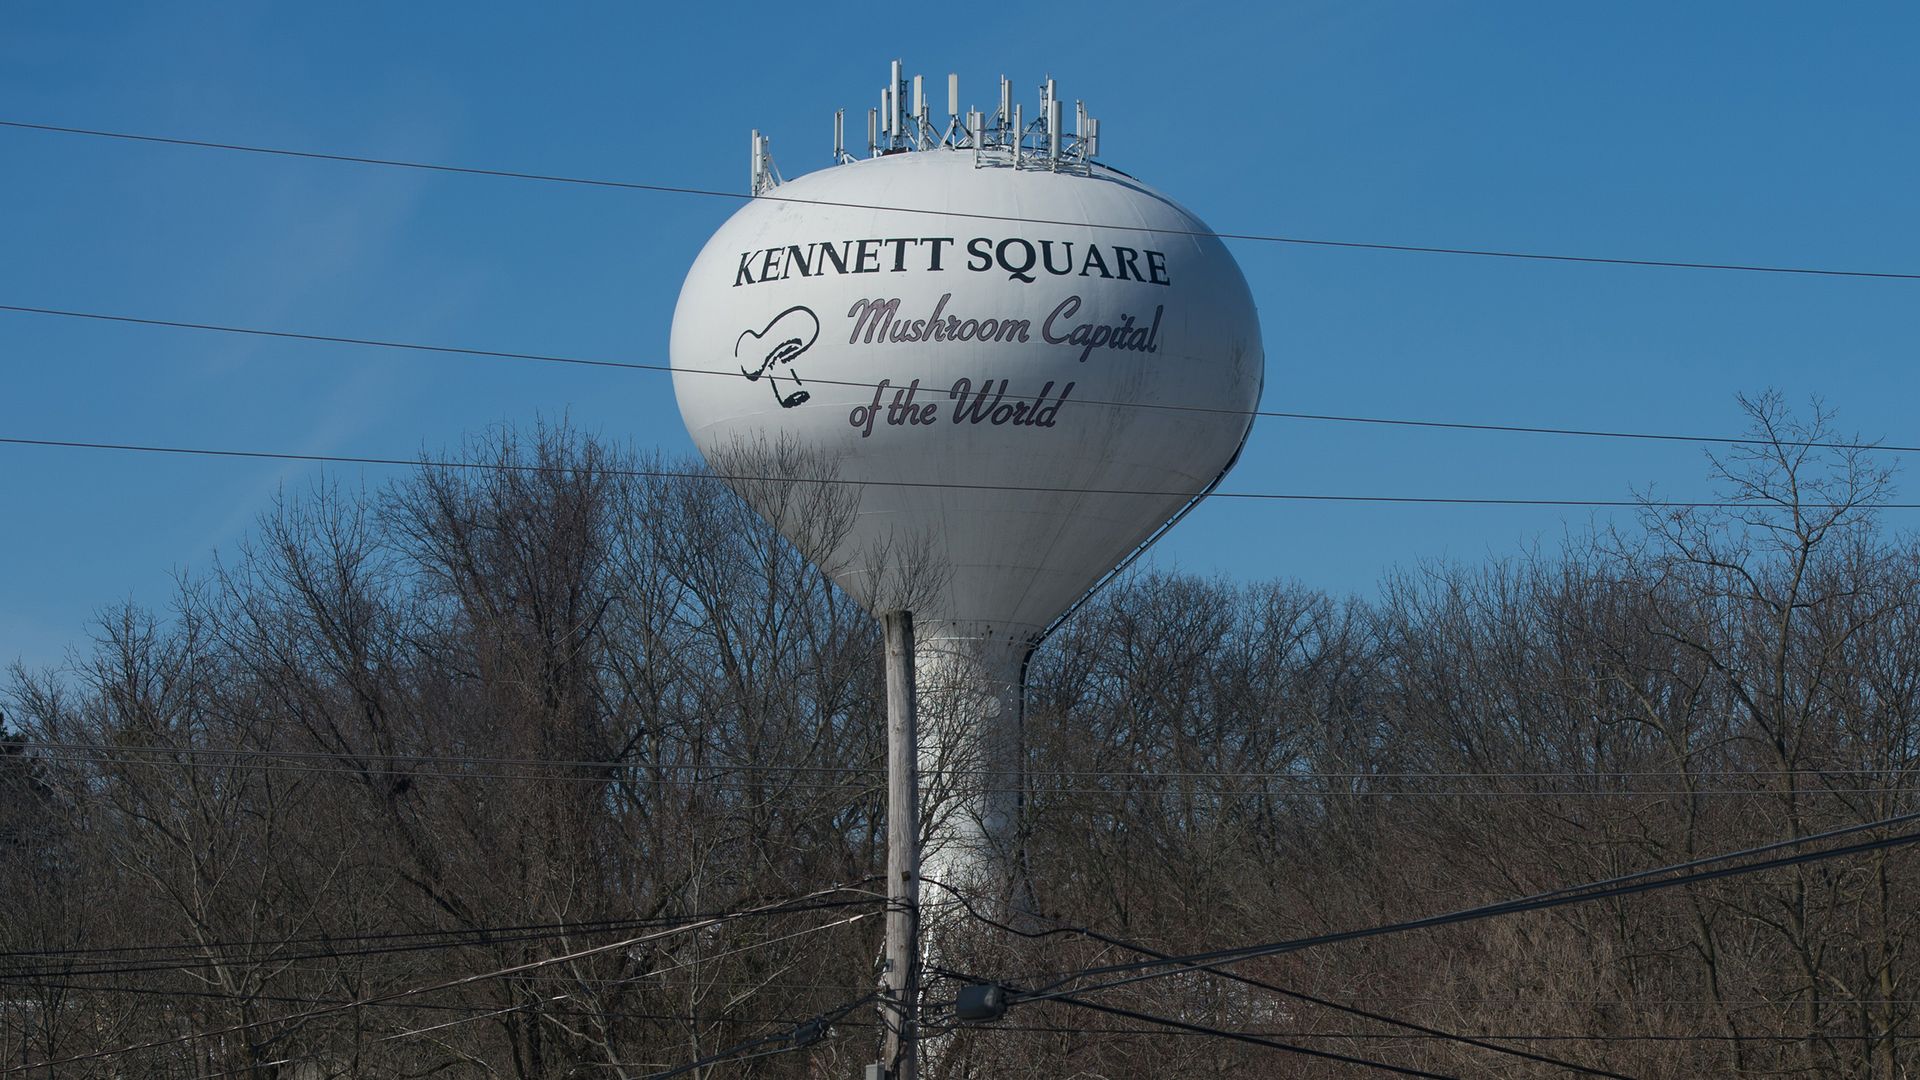 "Mushroom capital of the world" is displayed on town water tower in Kennett Square, Pennsylvania.